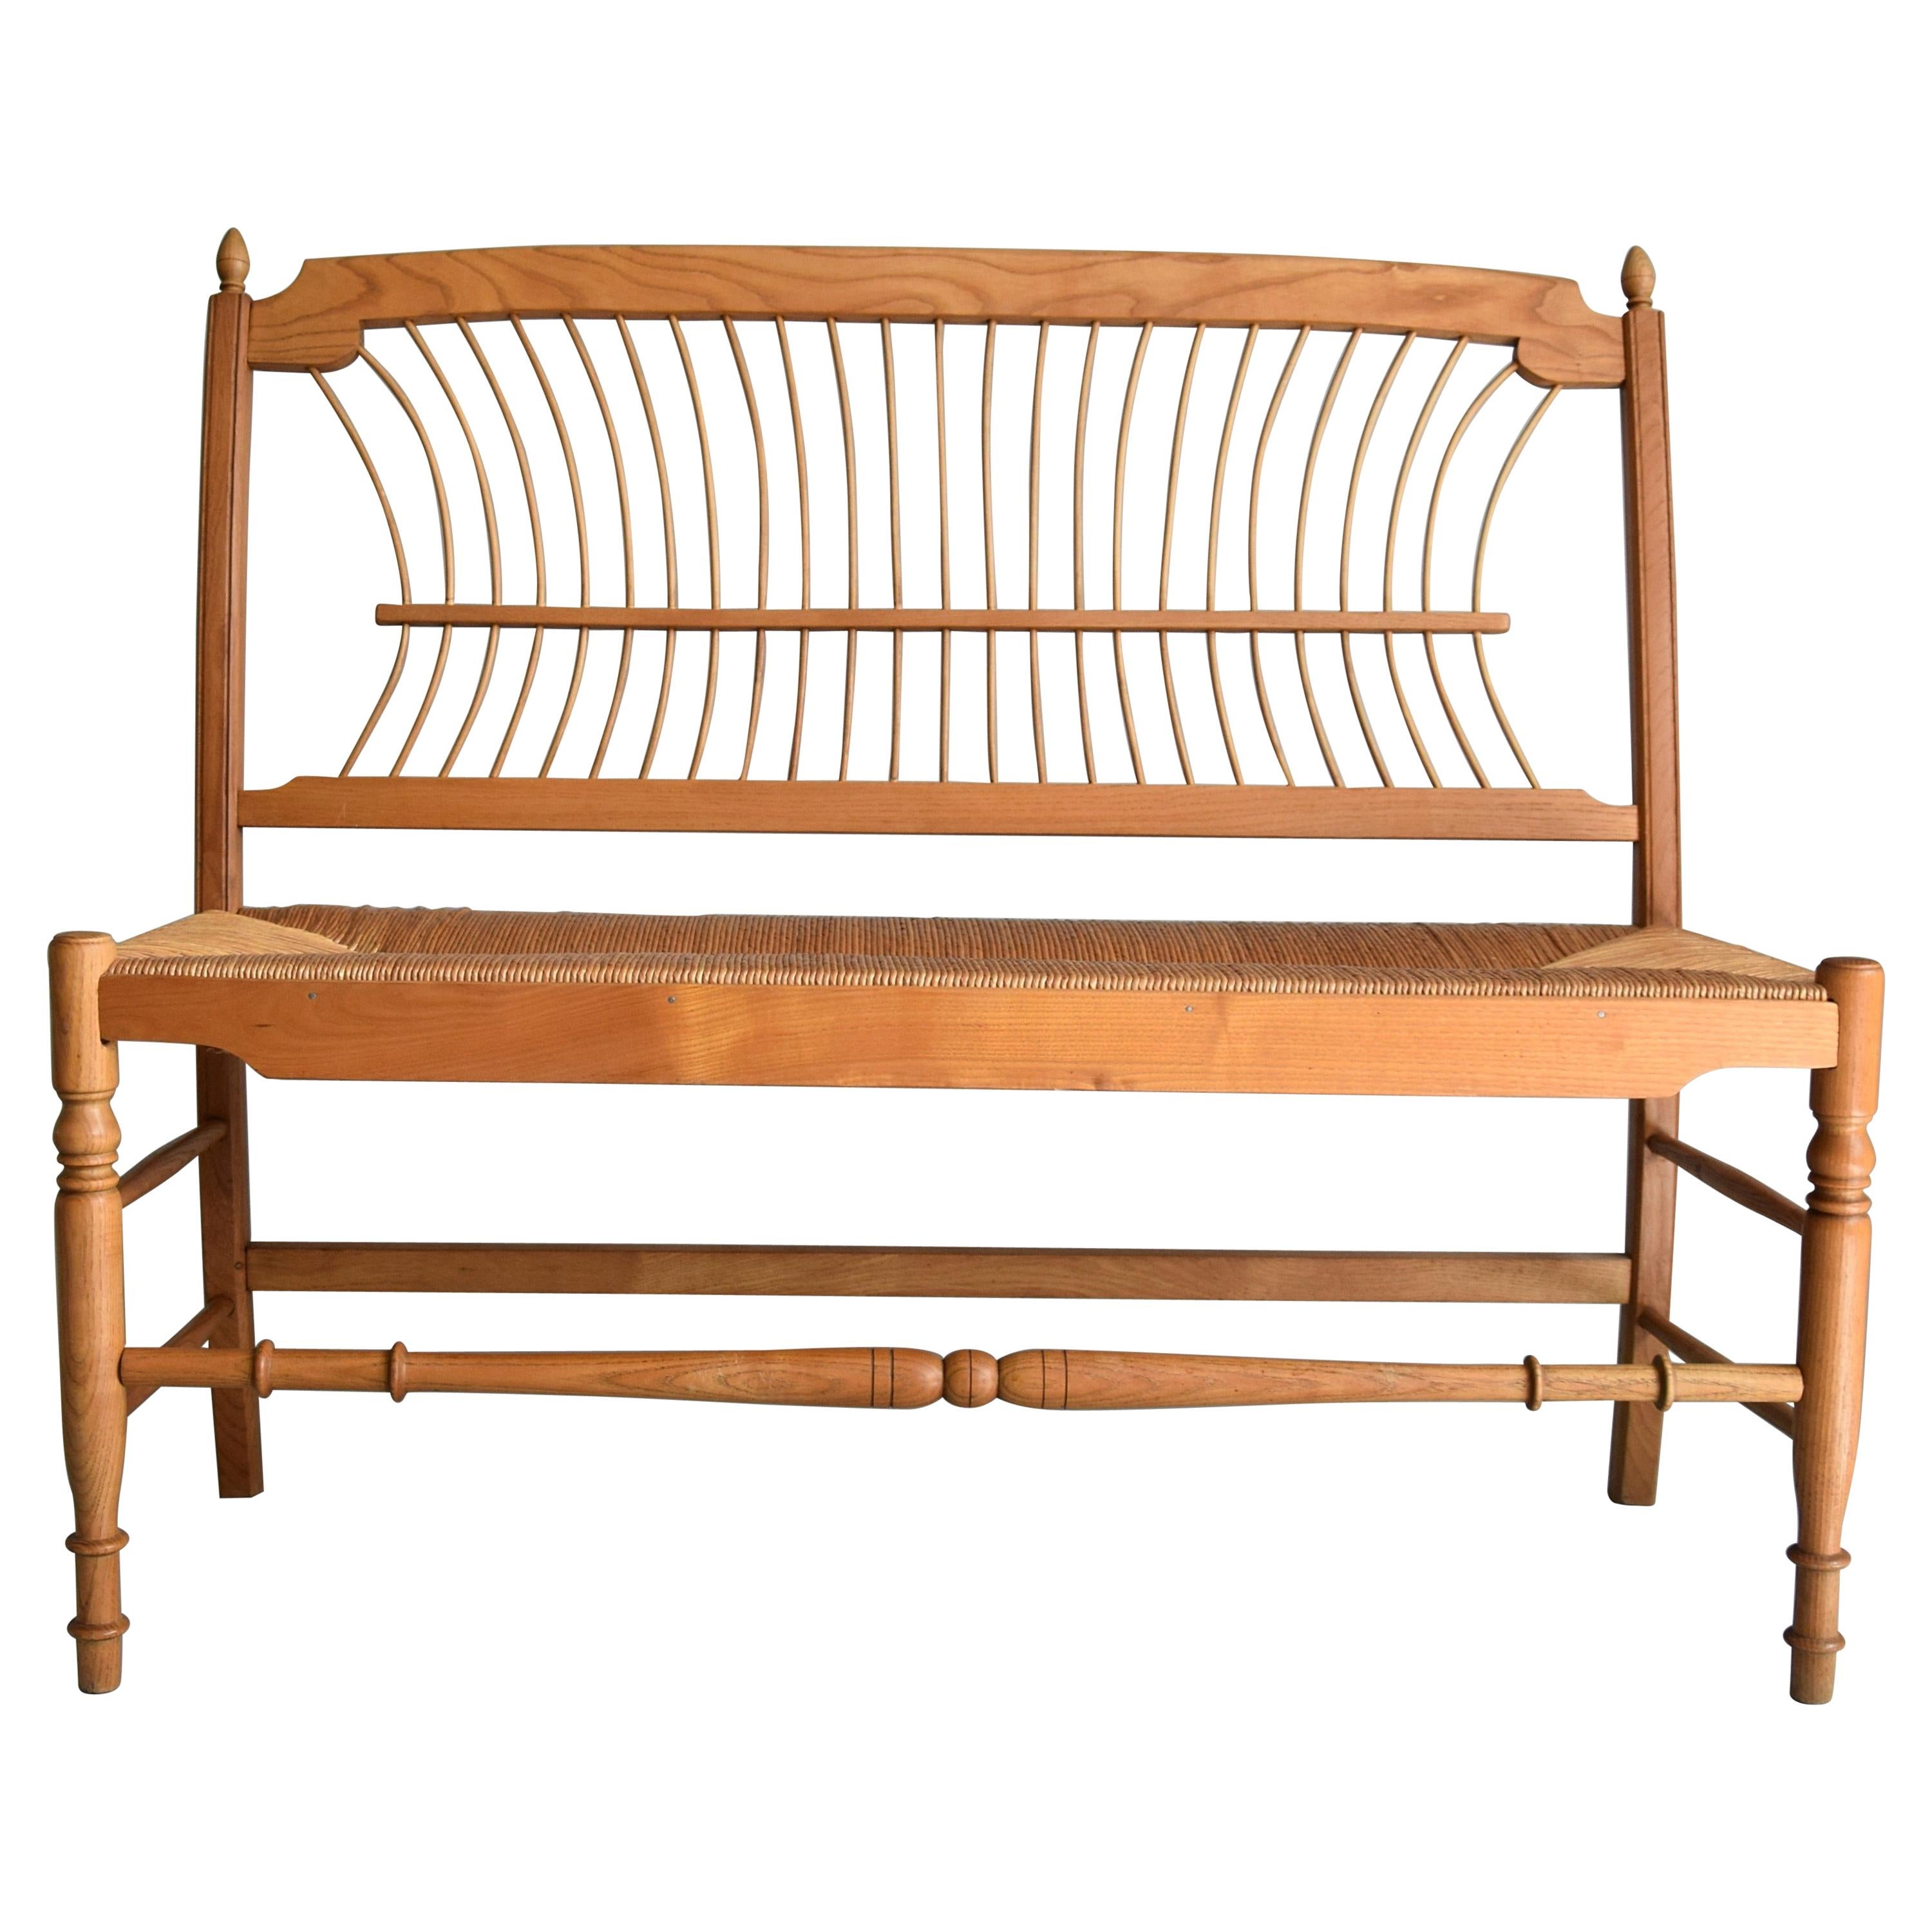 Swedish Mid-Century Modern Pine Wood and Paper Cord Bench